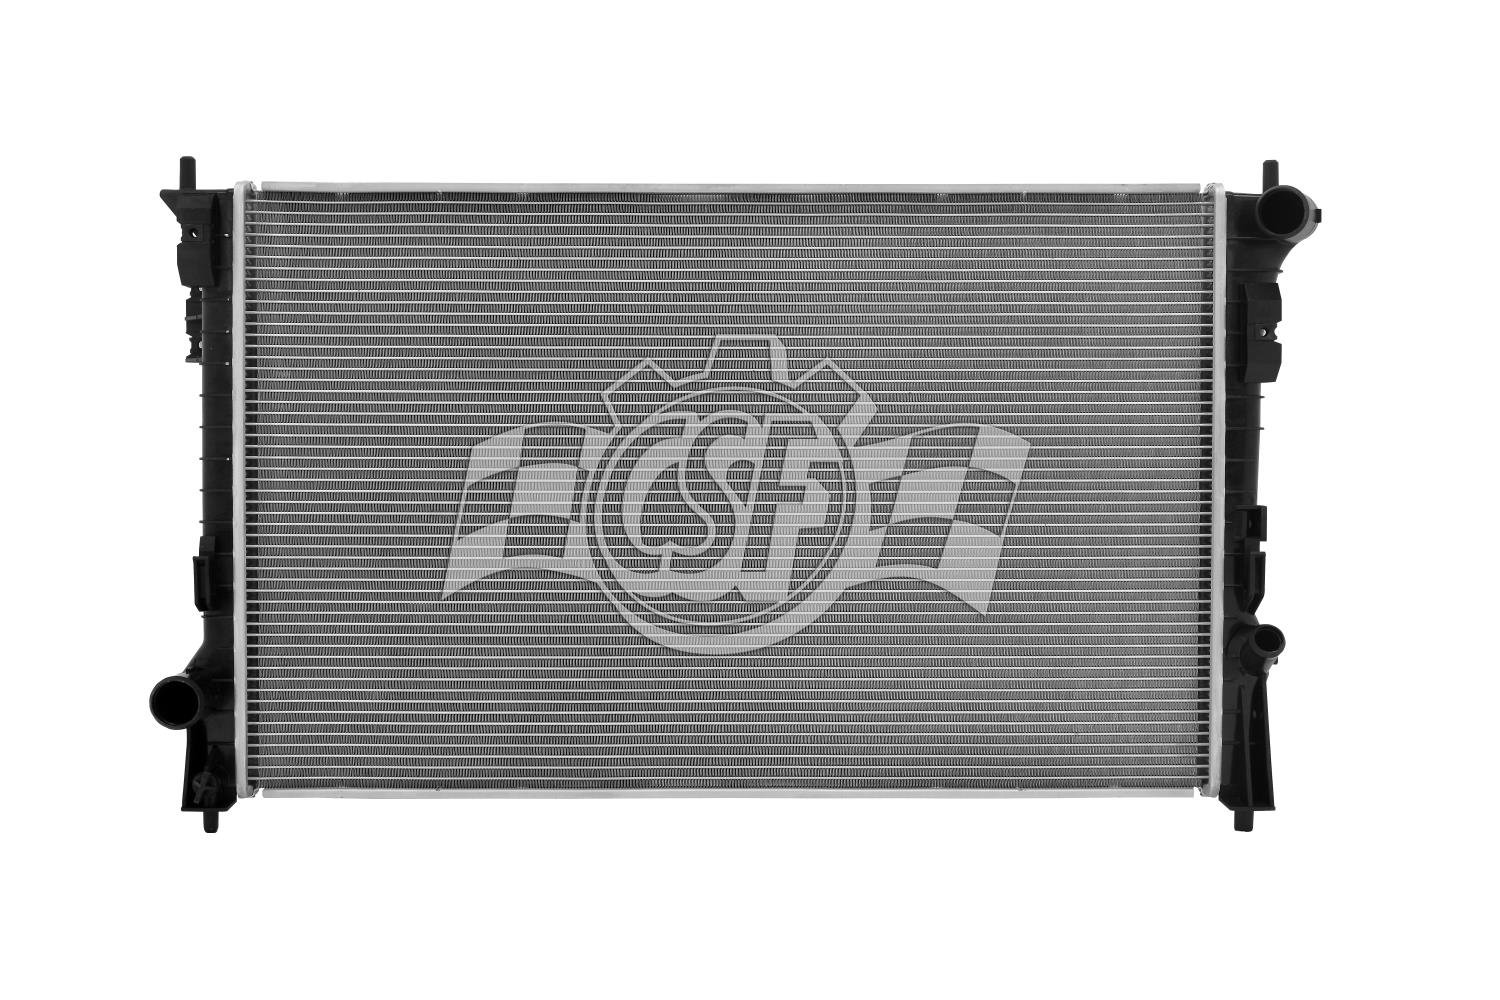 OE-Style 1-Row Radiator, Lincoln MKX, Ford Edge, Ford Taurus X, Mercury Sable, Ford Taurus, Lincoln MKS